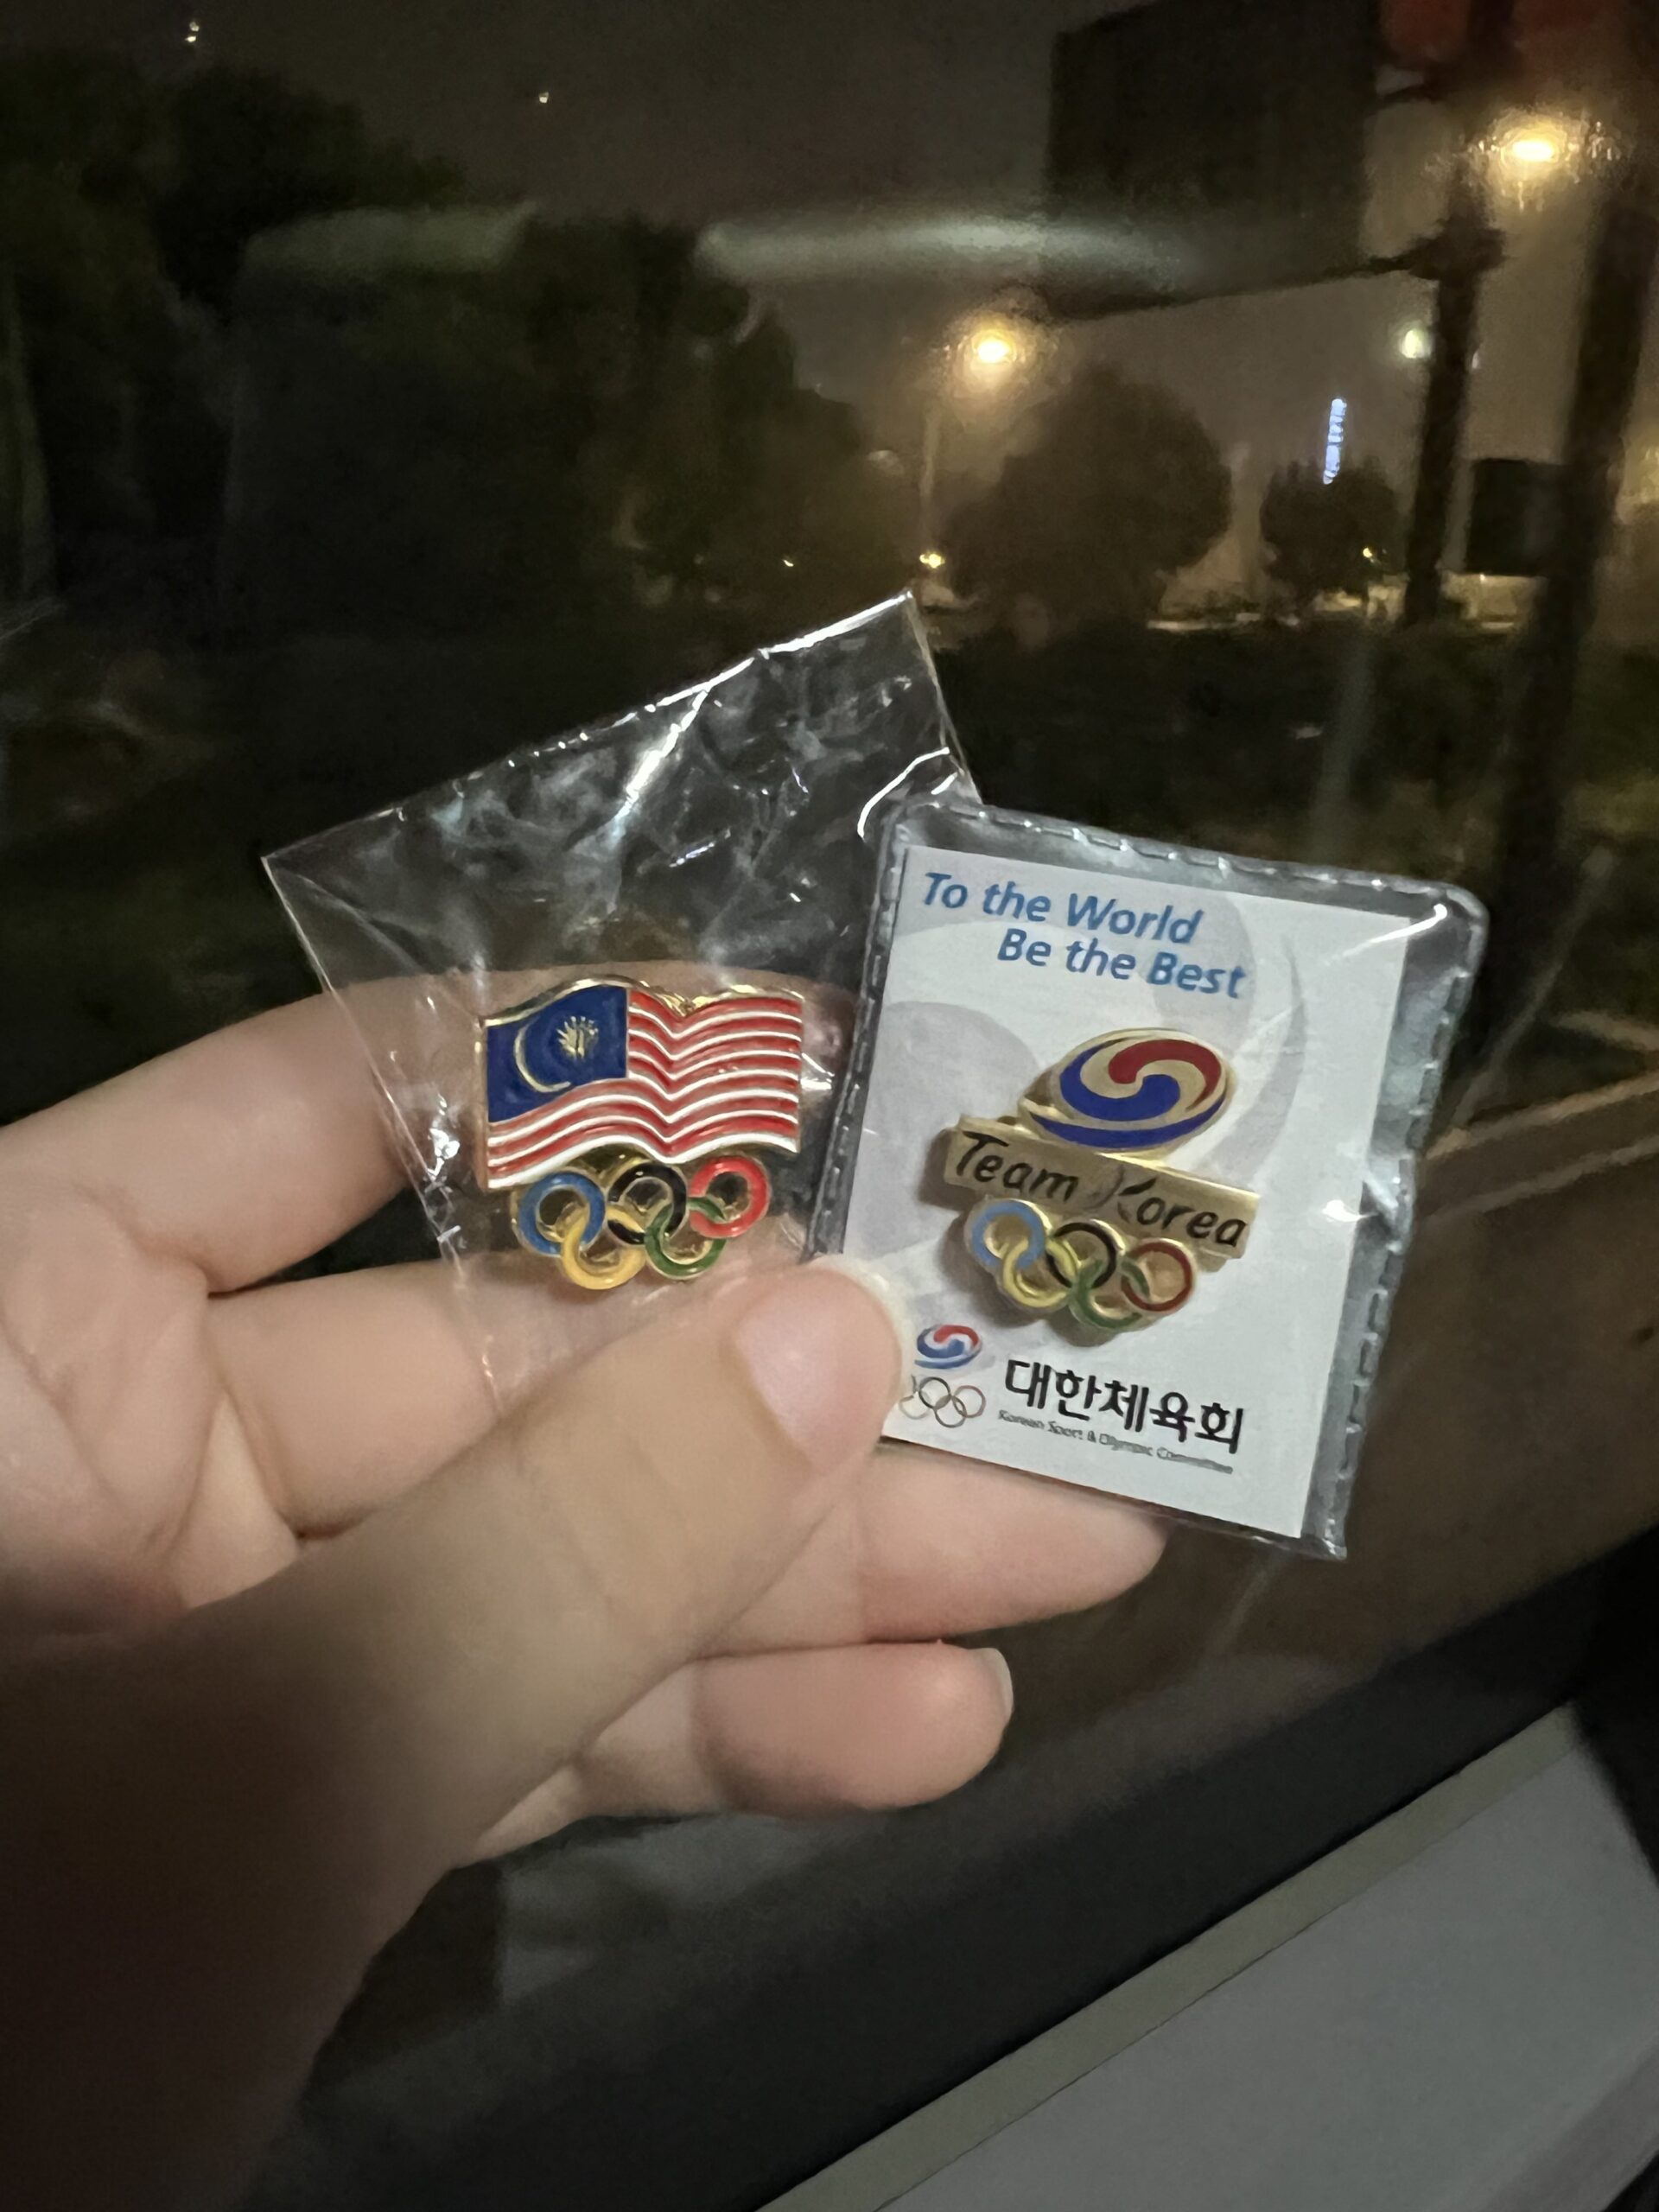 Badges received from the malaysian contingent of the hangzhou asian games